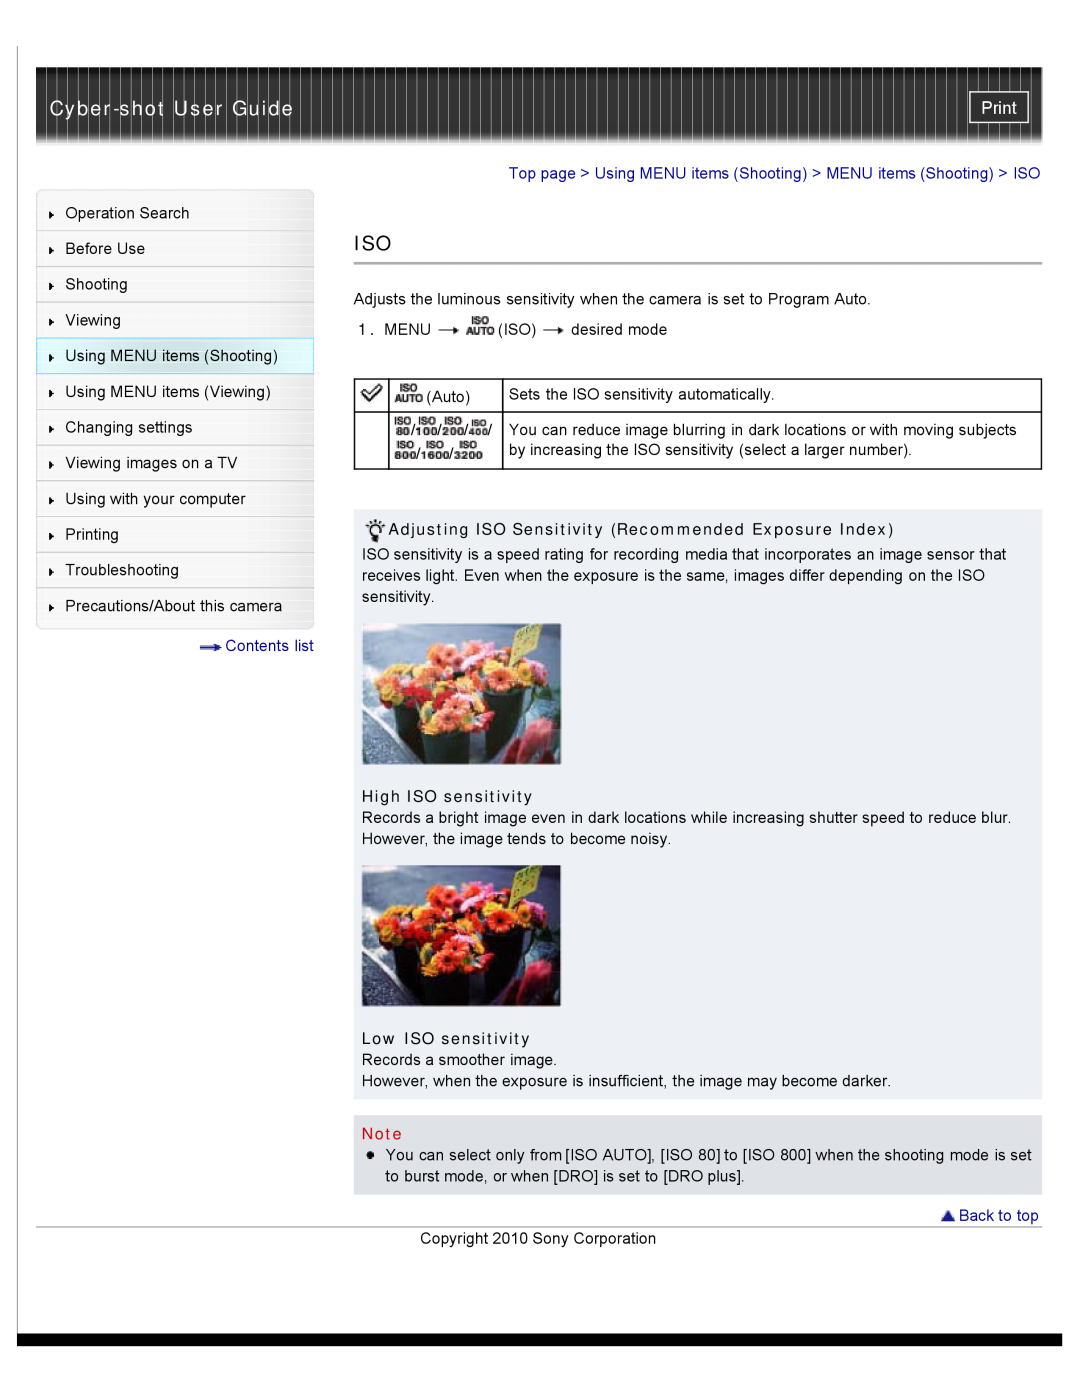 Sony W530, W550 Cyber-shot User Guide, Print, Top page Using MENU items Shooting MENU items Shooting ISO, Contents list 